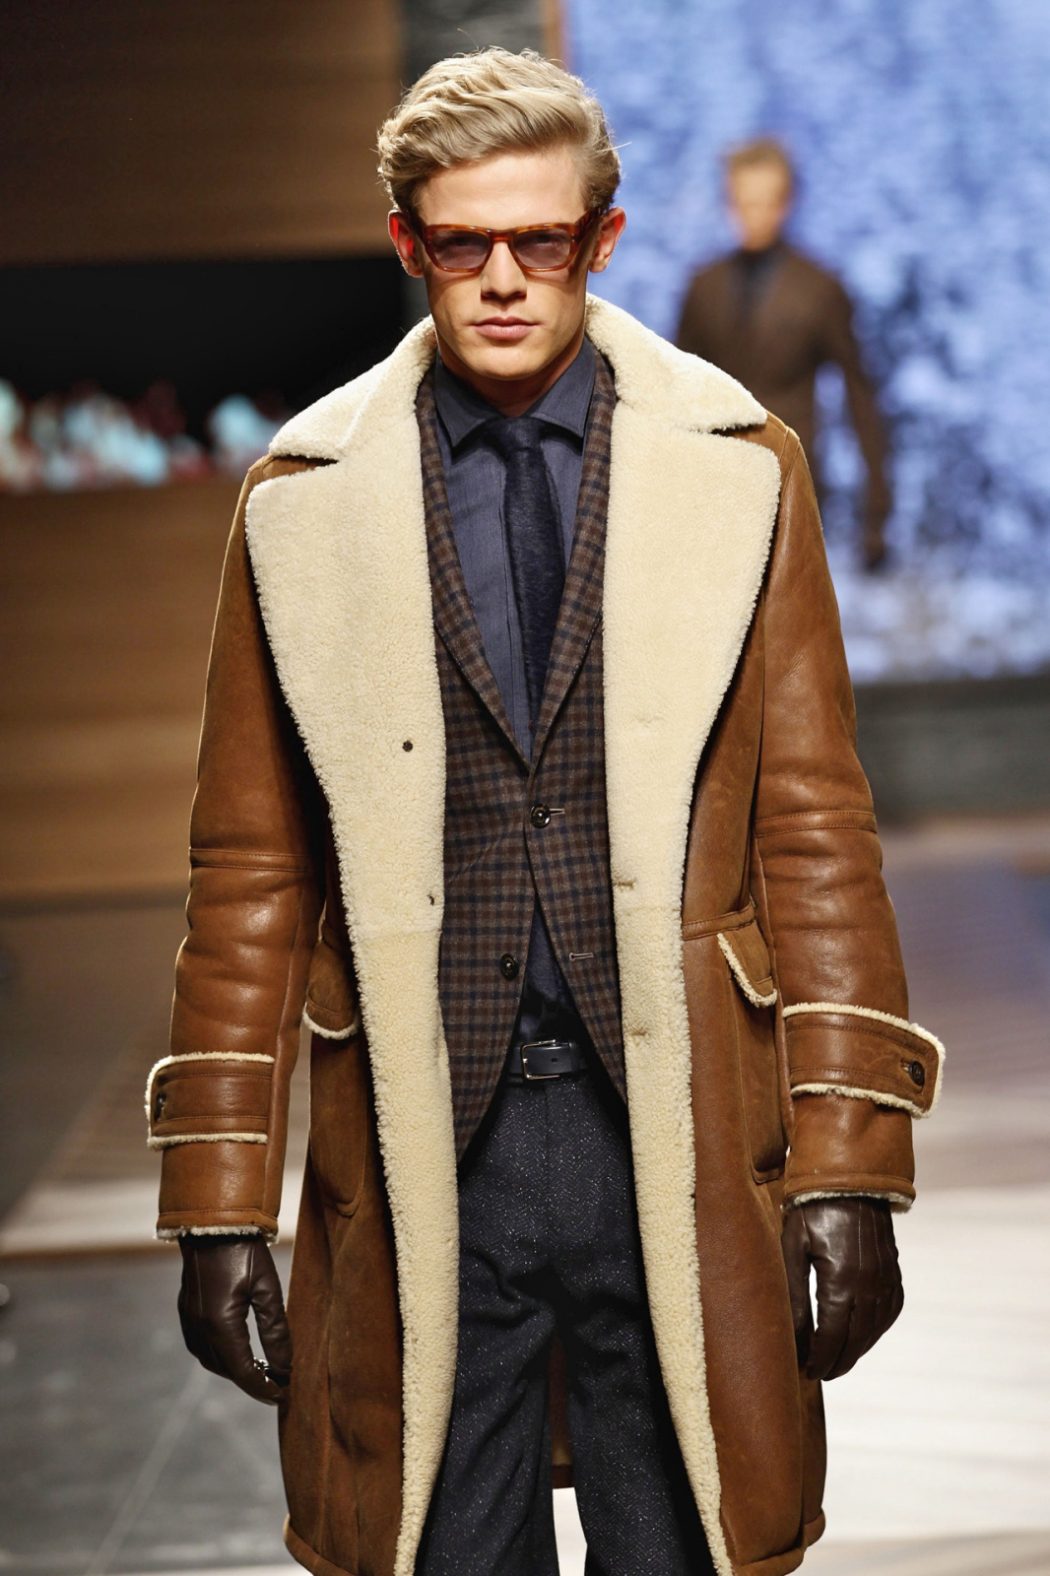 Shearling3 35+ Winter Fashion Trends for Handsome Men - 20